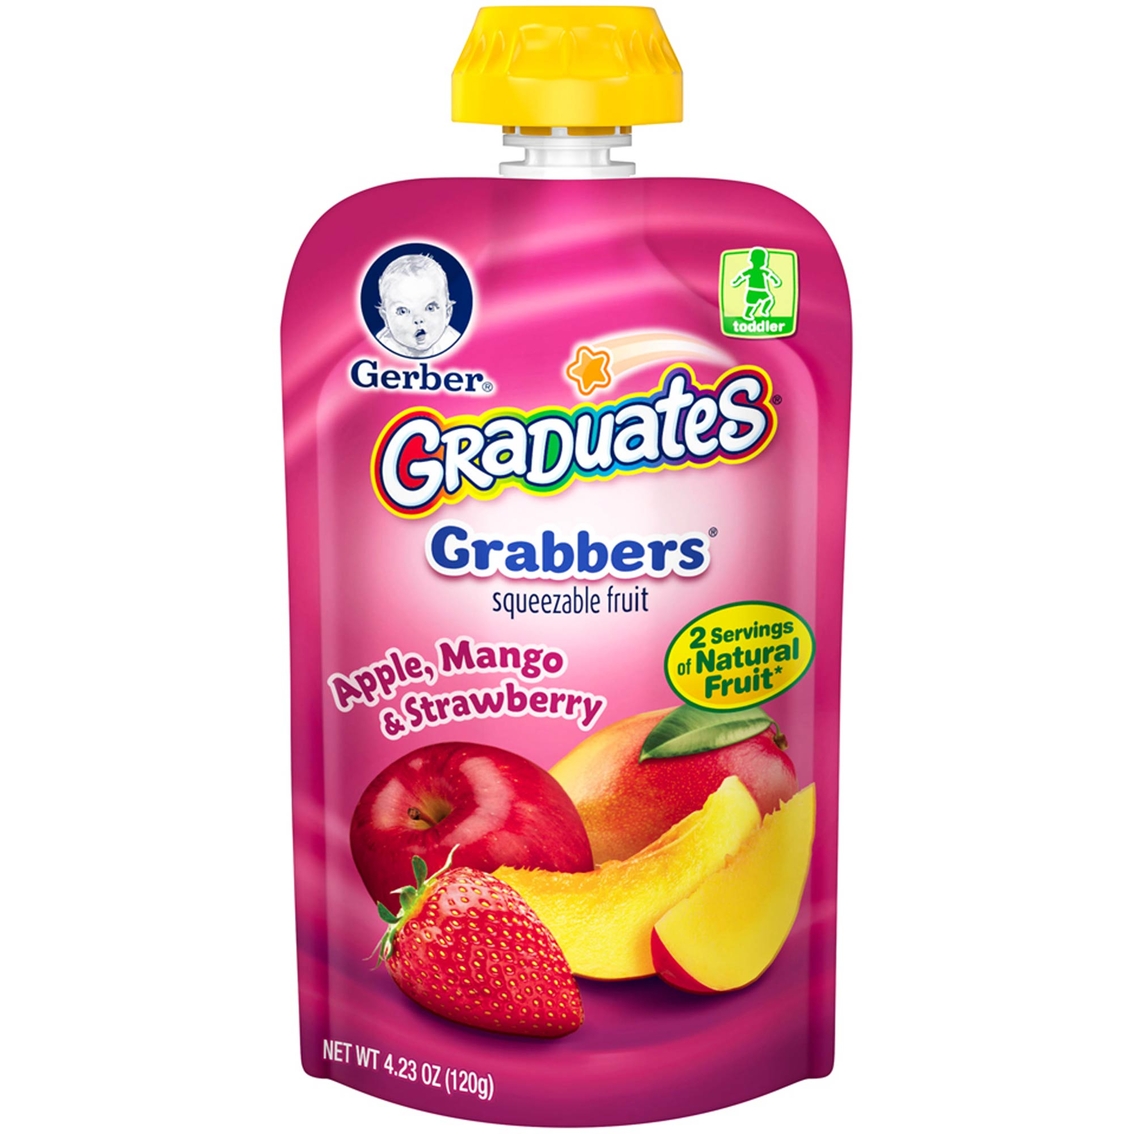 Gerber Graduates Grabbers Squeezable Fruit Apple Mango And Strawberry 4